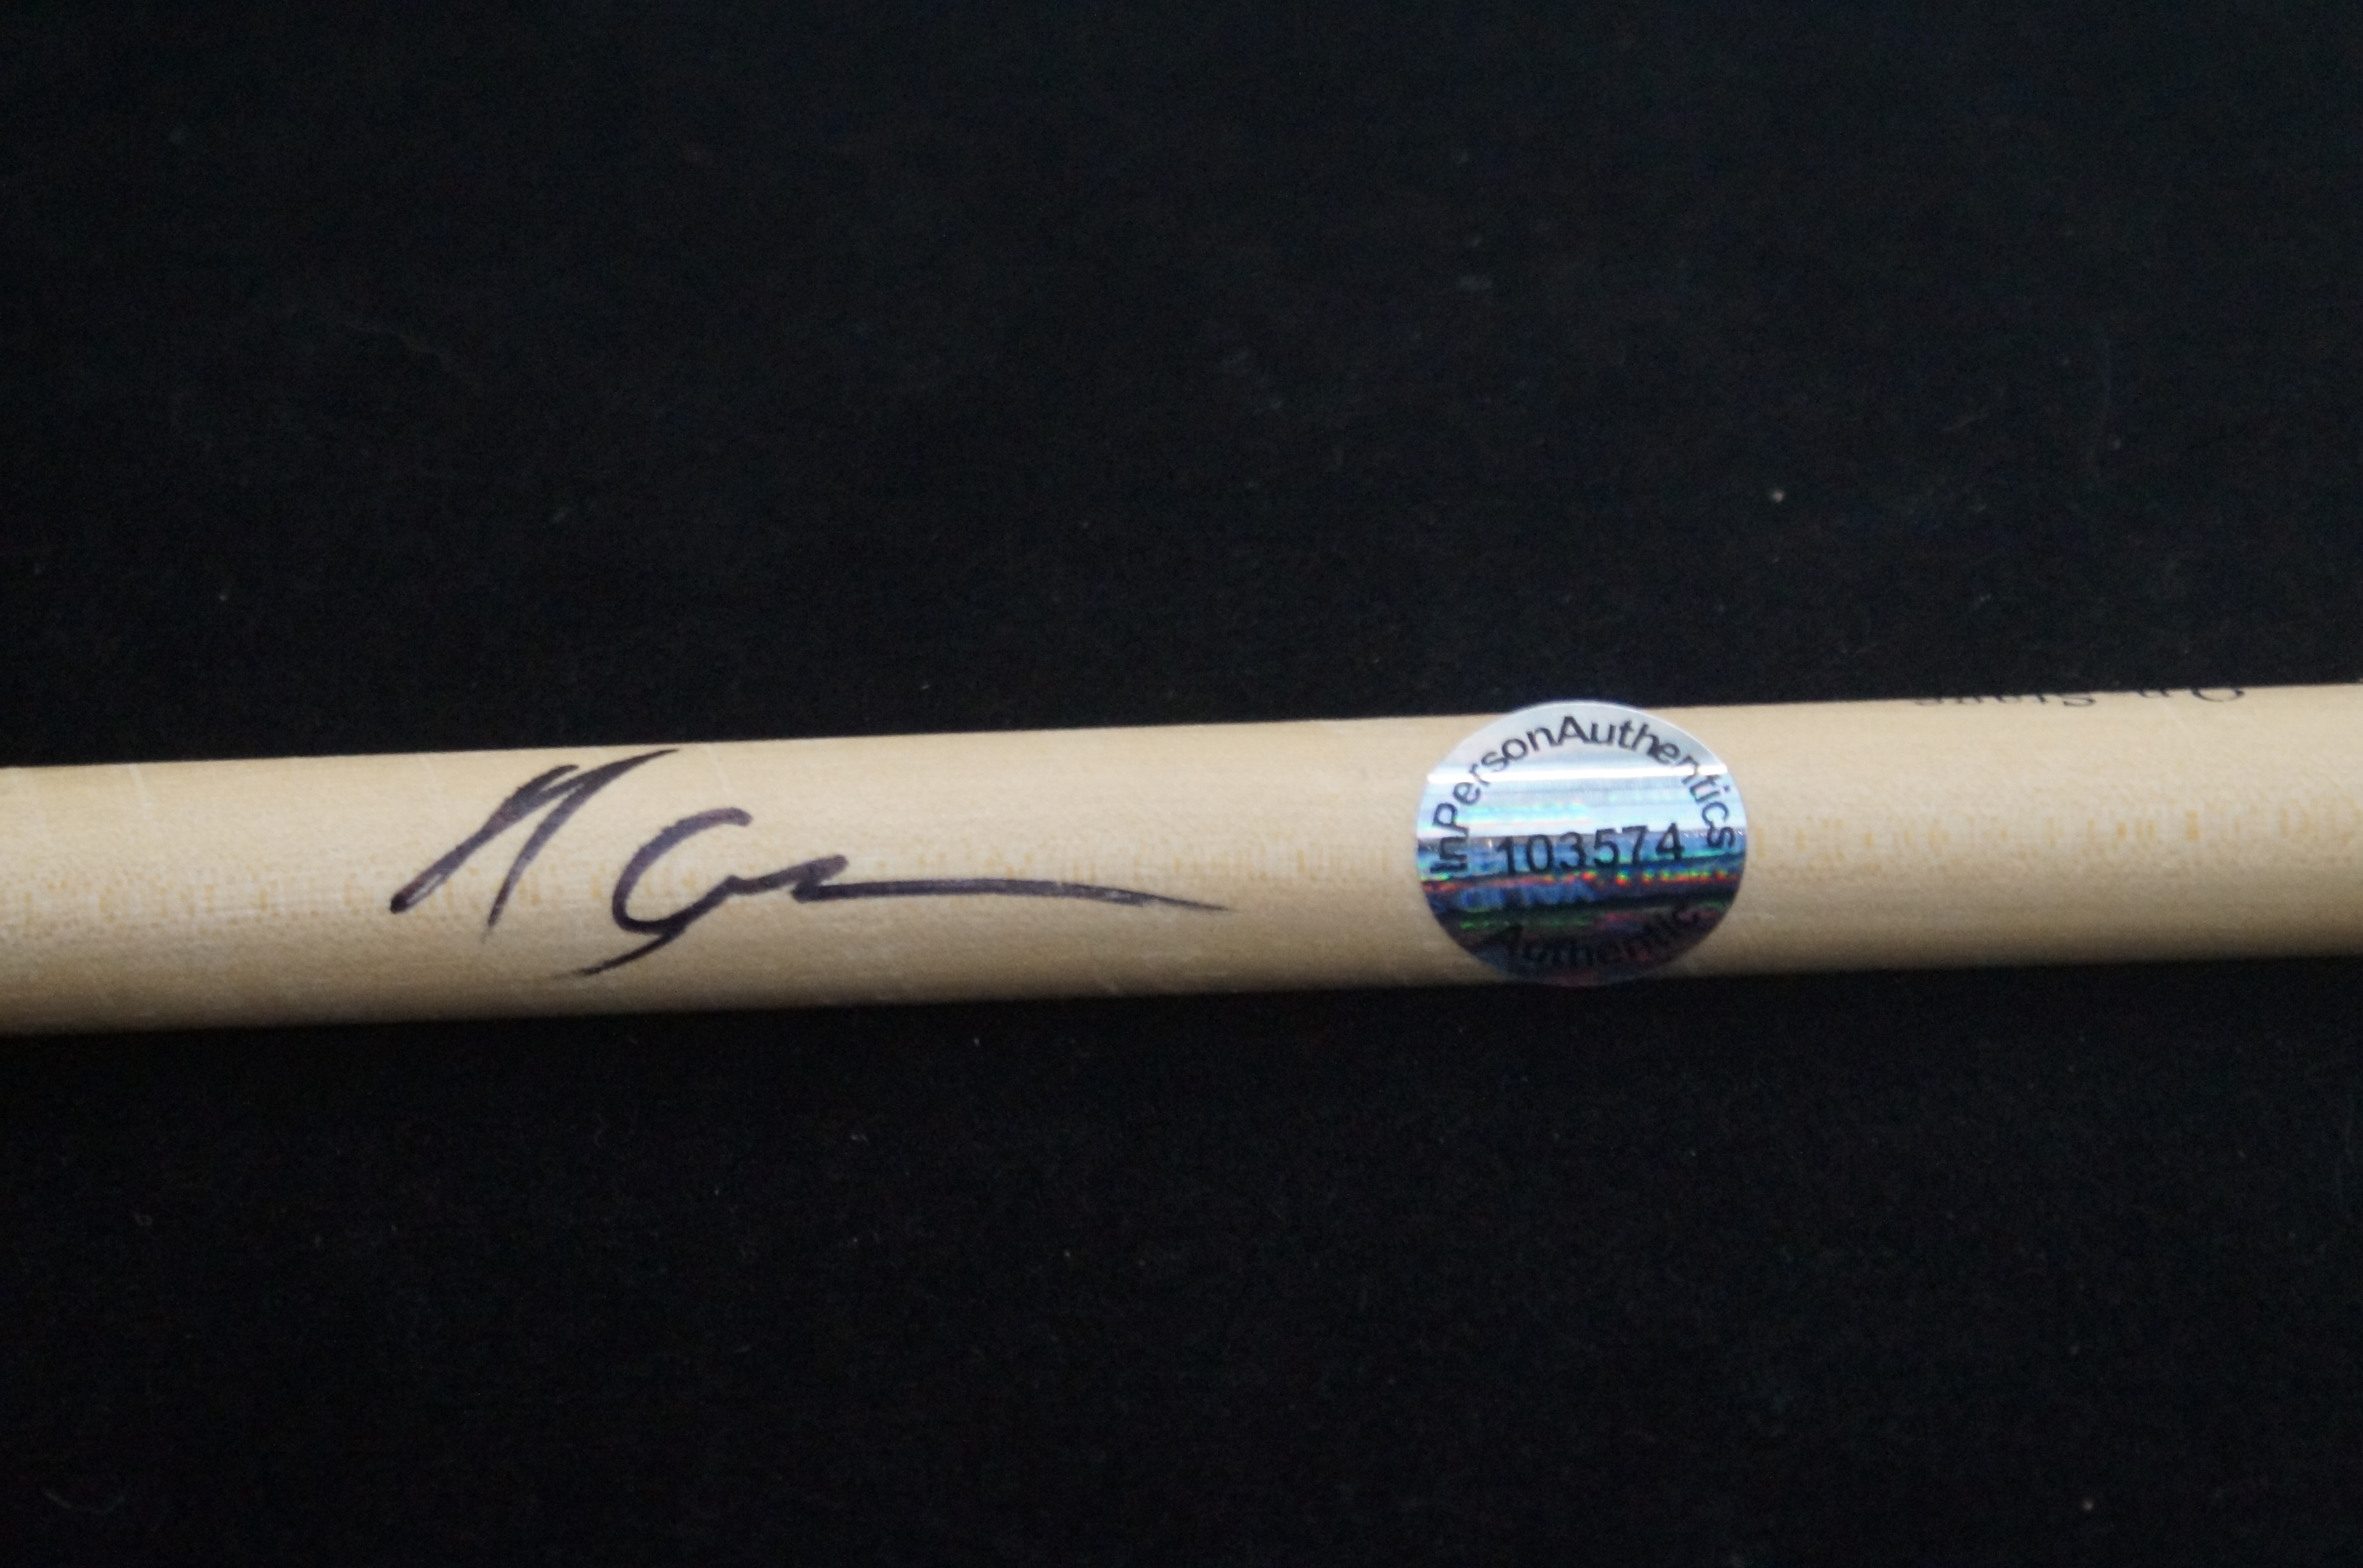 Lars Ulrich - Metallica Signed Drum Stick from Inp